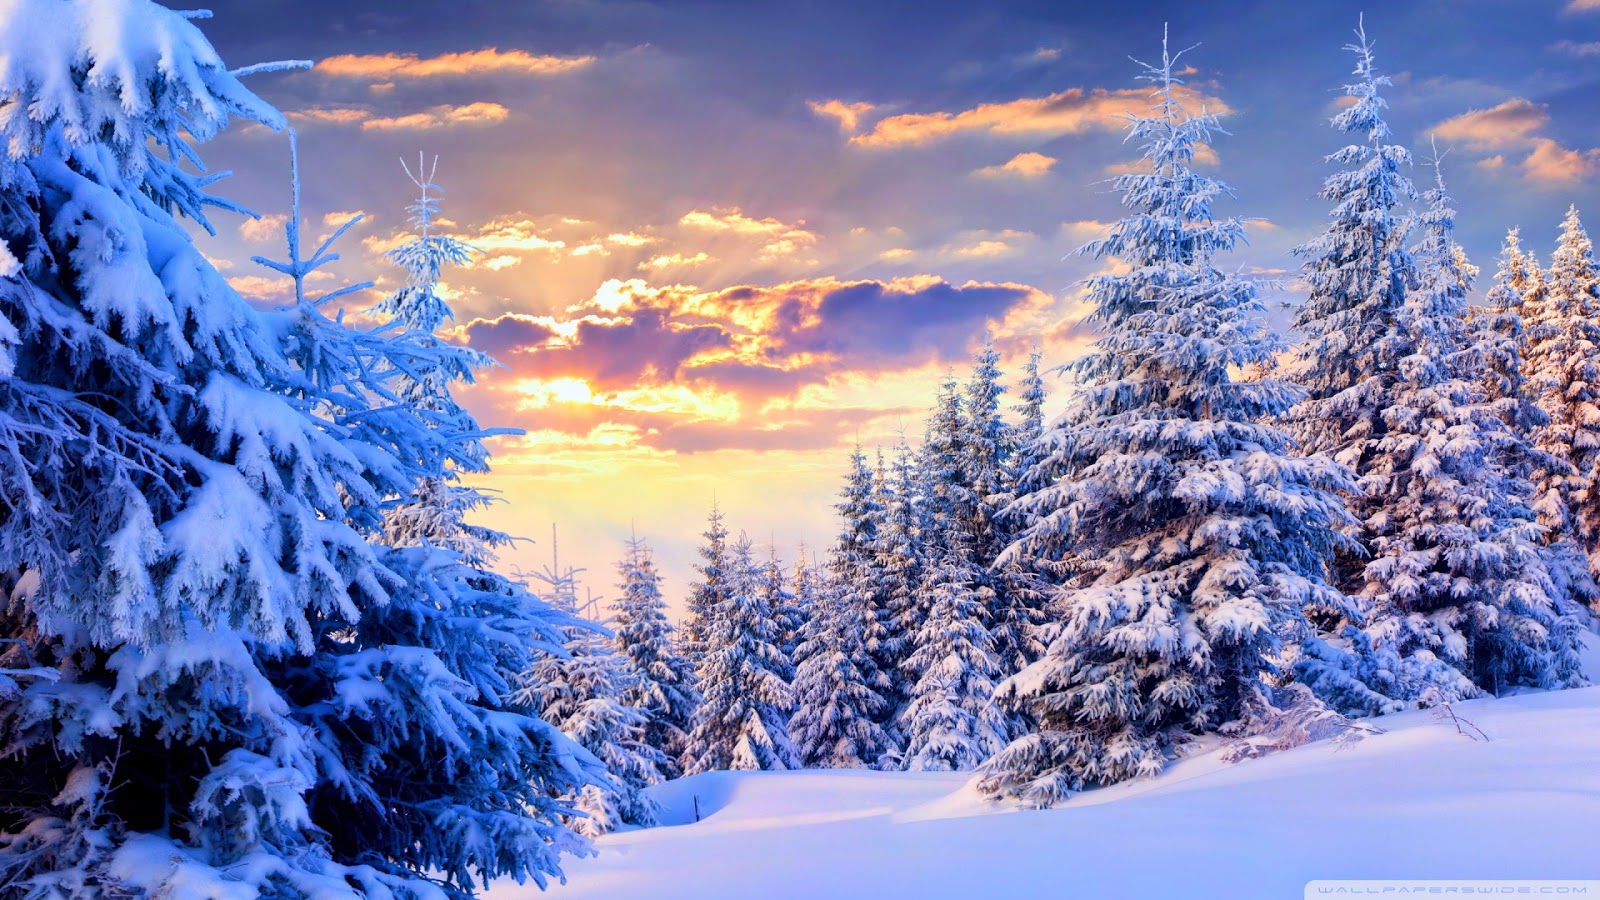 snow, snow wallpapers, snowy wallpapers, wallpapers, snow mountains, snow fall wallpapers, nature wallpapers, winter wallpapers, winter, winter season wallpapers, pc wallpapers, desktop backgrounds, backgrounds, hd backgrounds, 